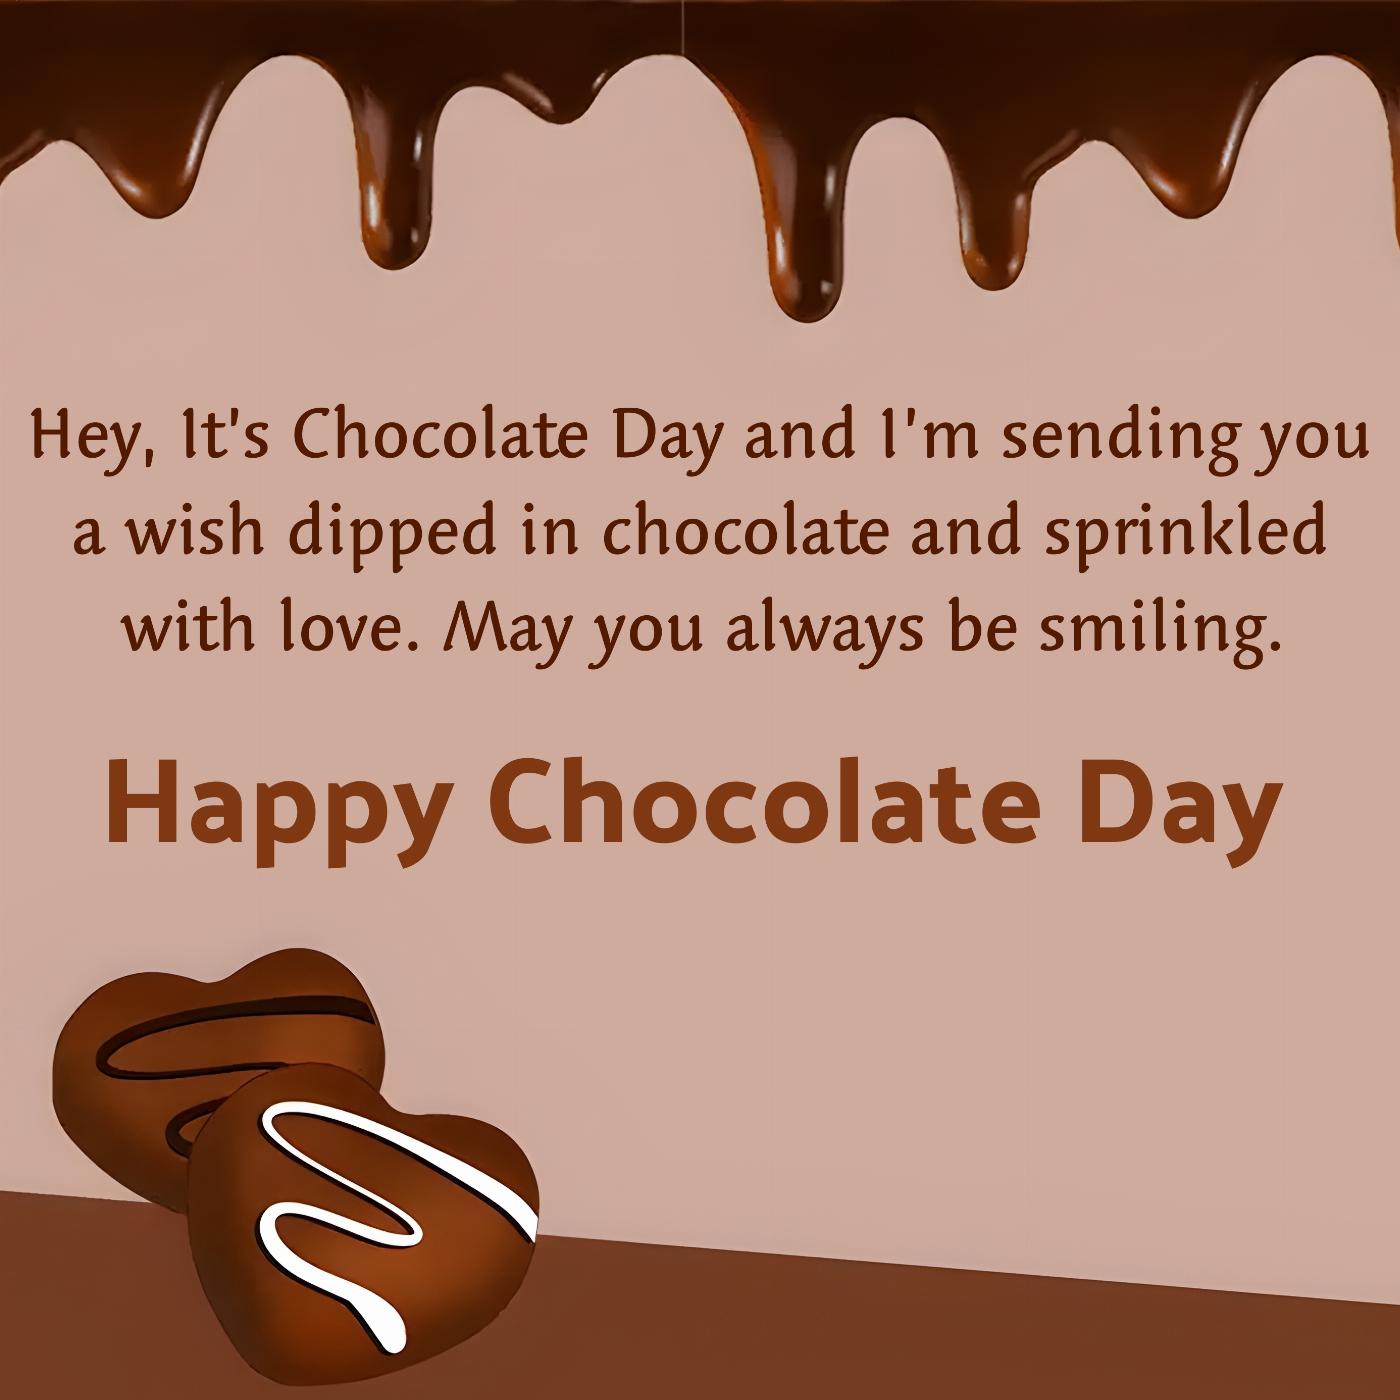 Hey Its Chocolate Day and Im sending you a wish